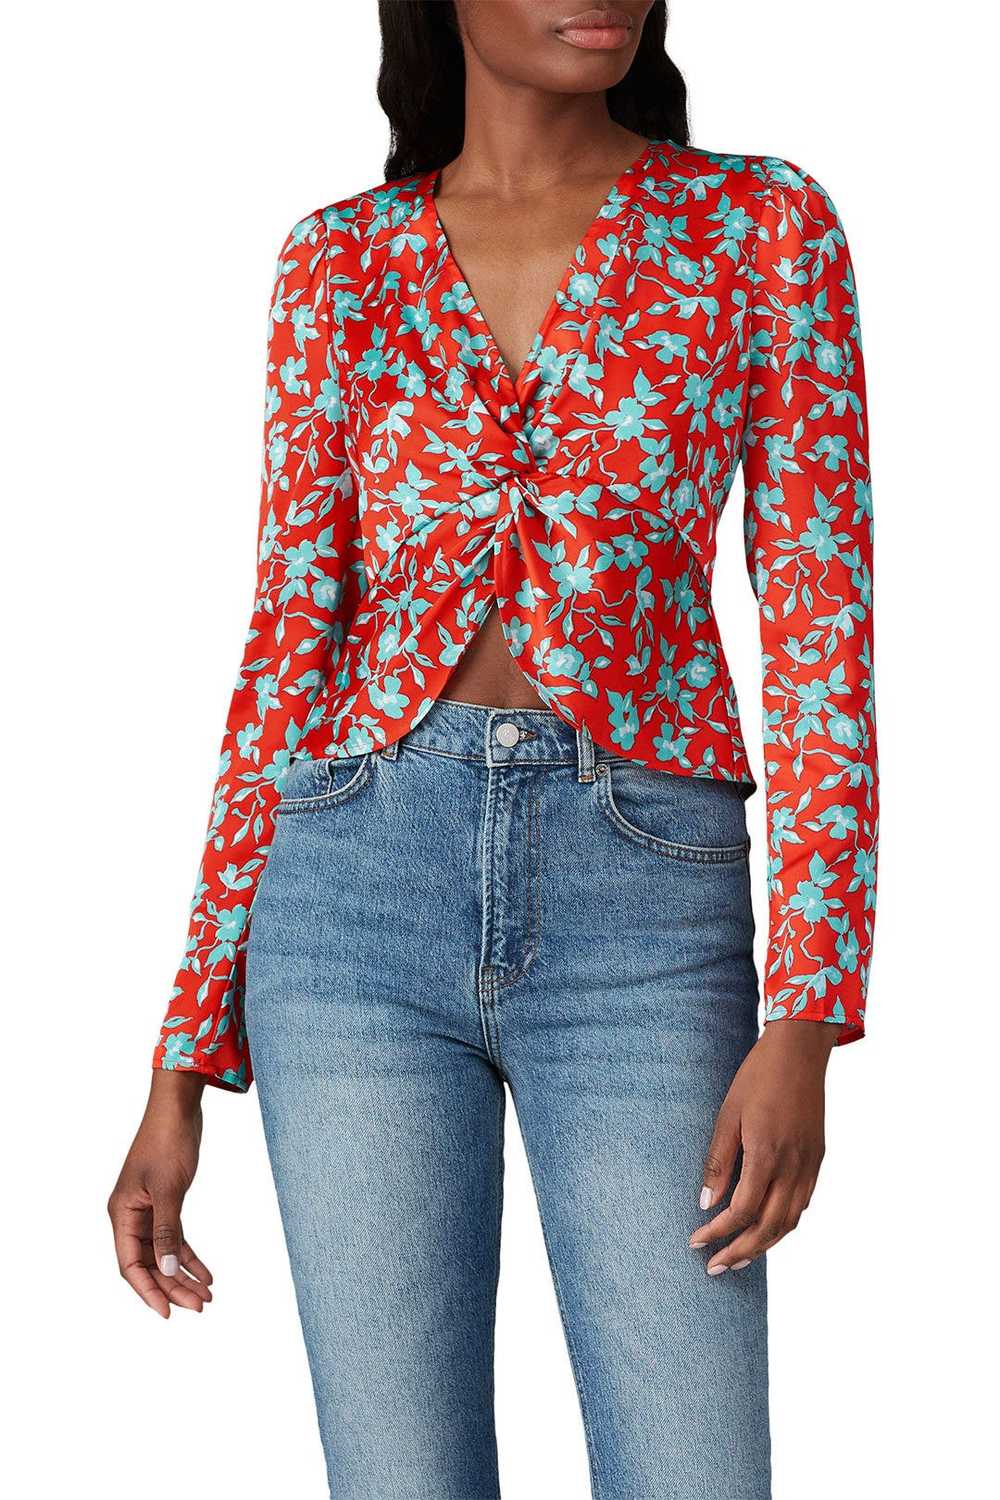 Love, Whit by Whitney Port Red Floral Crop Top - image 2